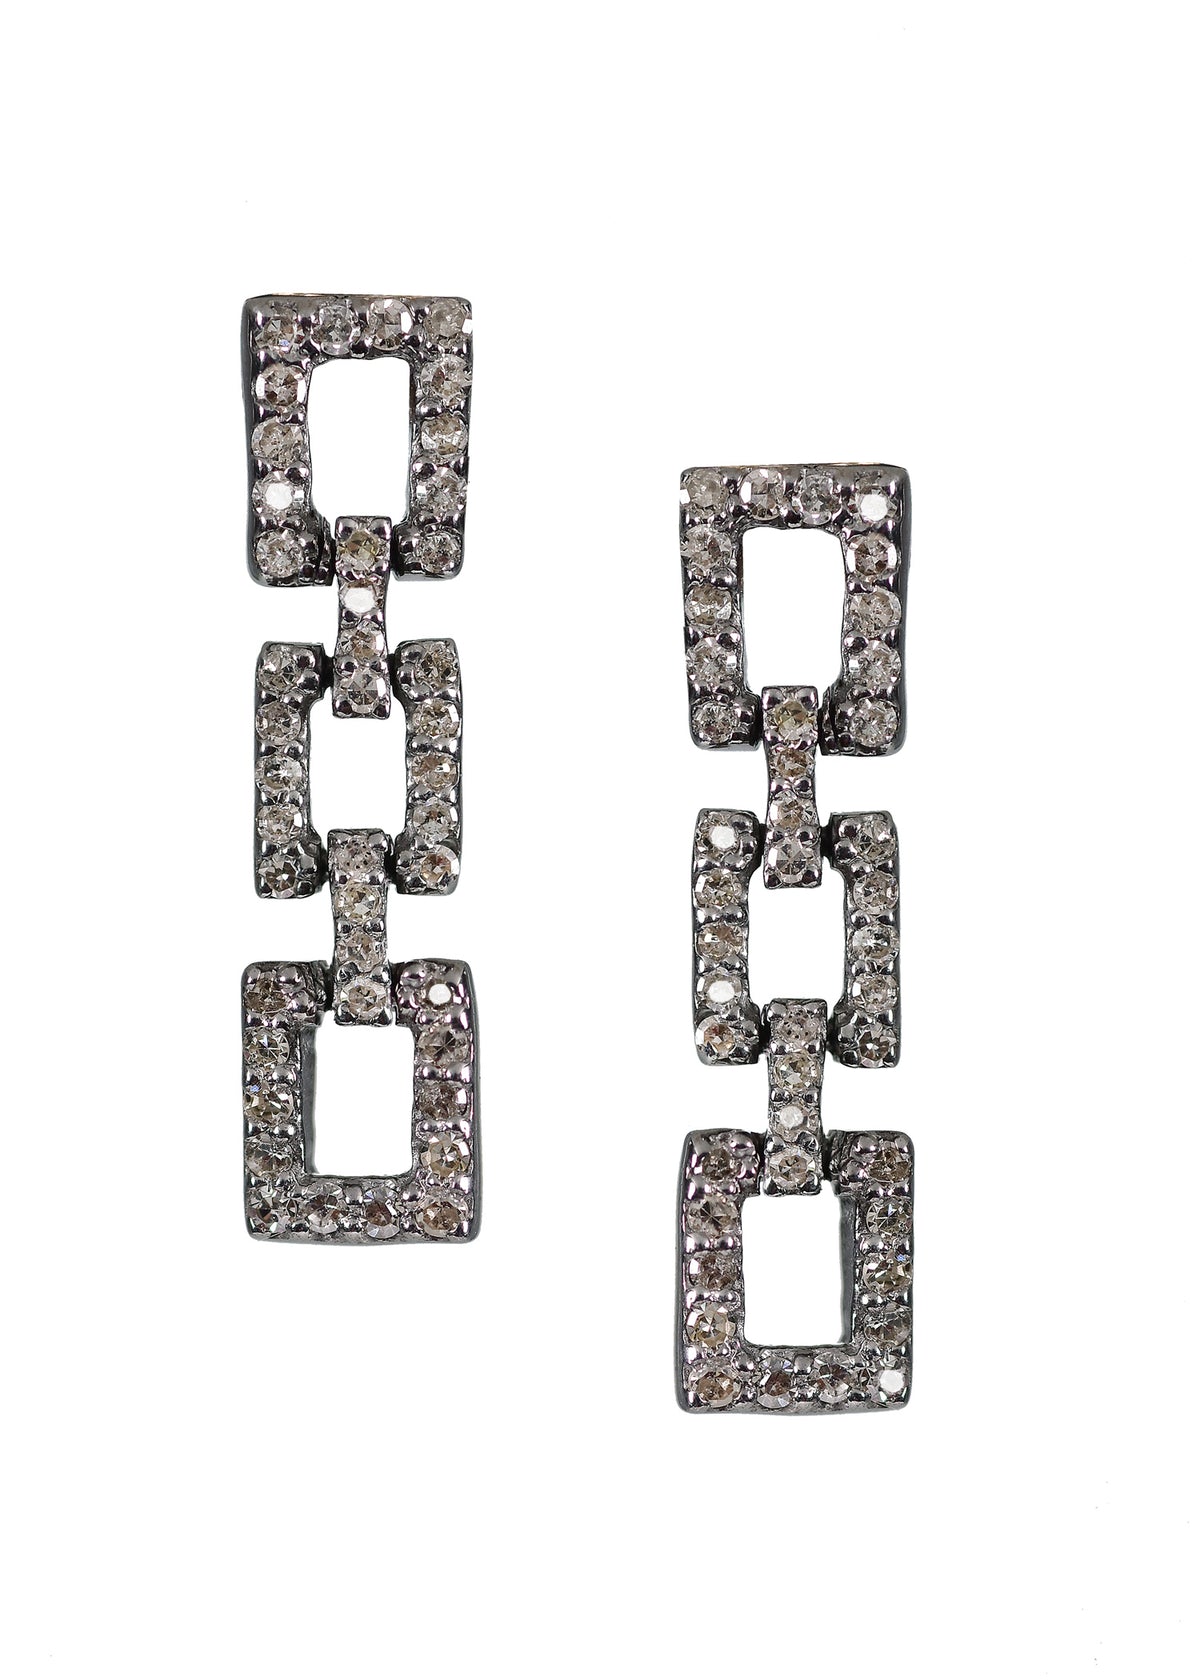 Diamond Sterling silver Special order only Earrings measure 3/4&quot; in length and 3/16&quot; in width Handmade in our Los Angeles studio